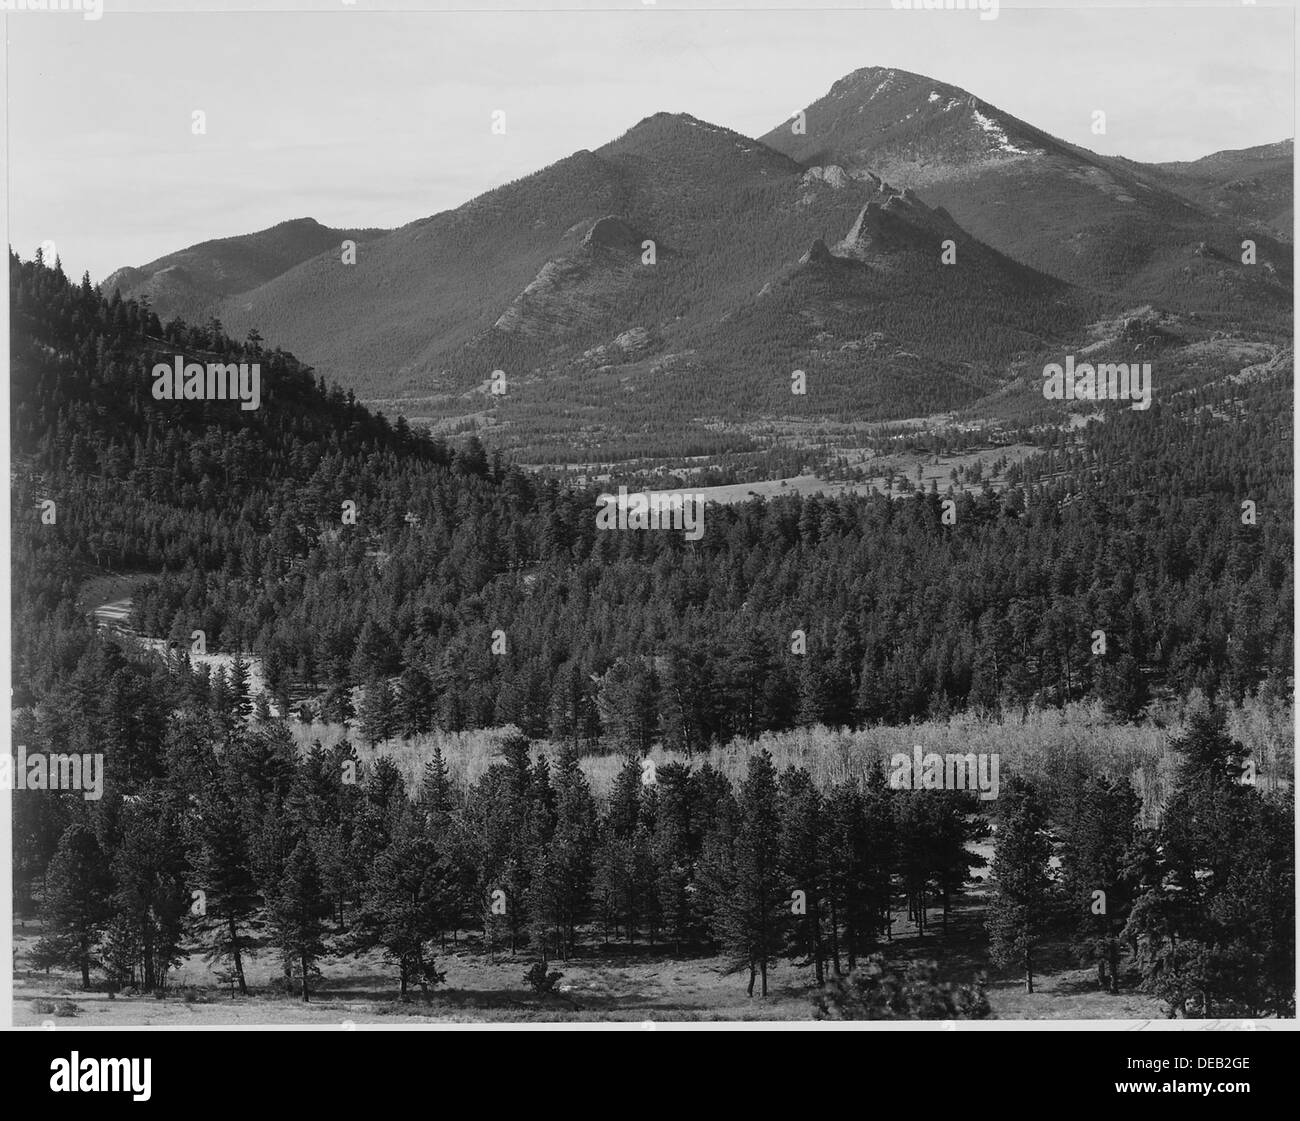 View with trees in foreground, barren mountains in background, In Rocky Mountain National Park, Colorado, 1933 - 1942 519971 Stock Photo